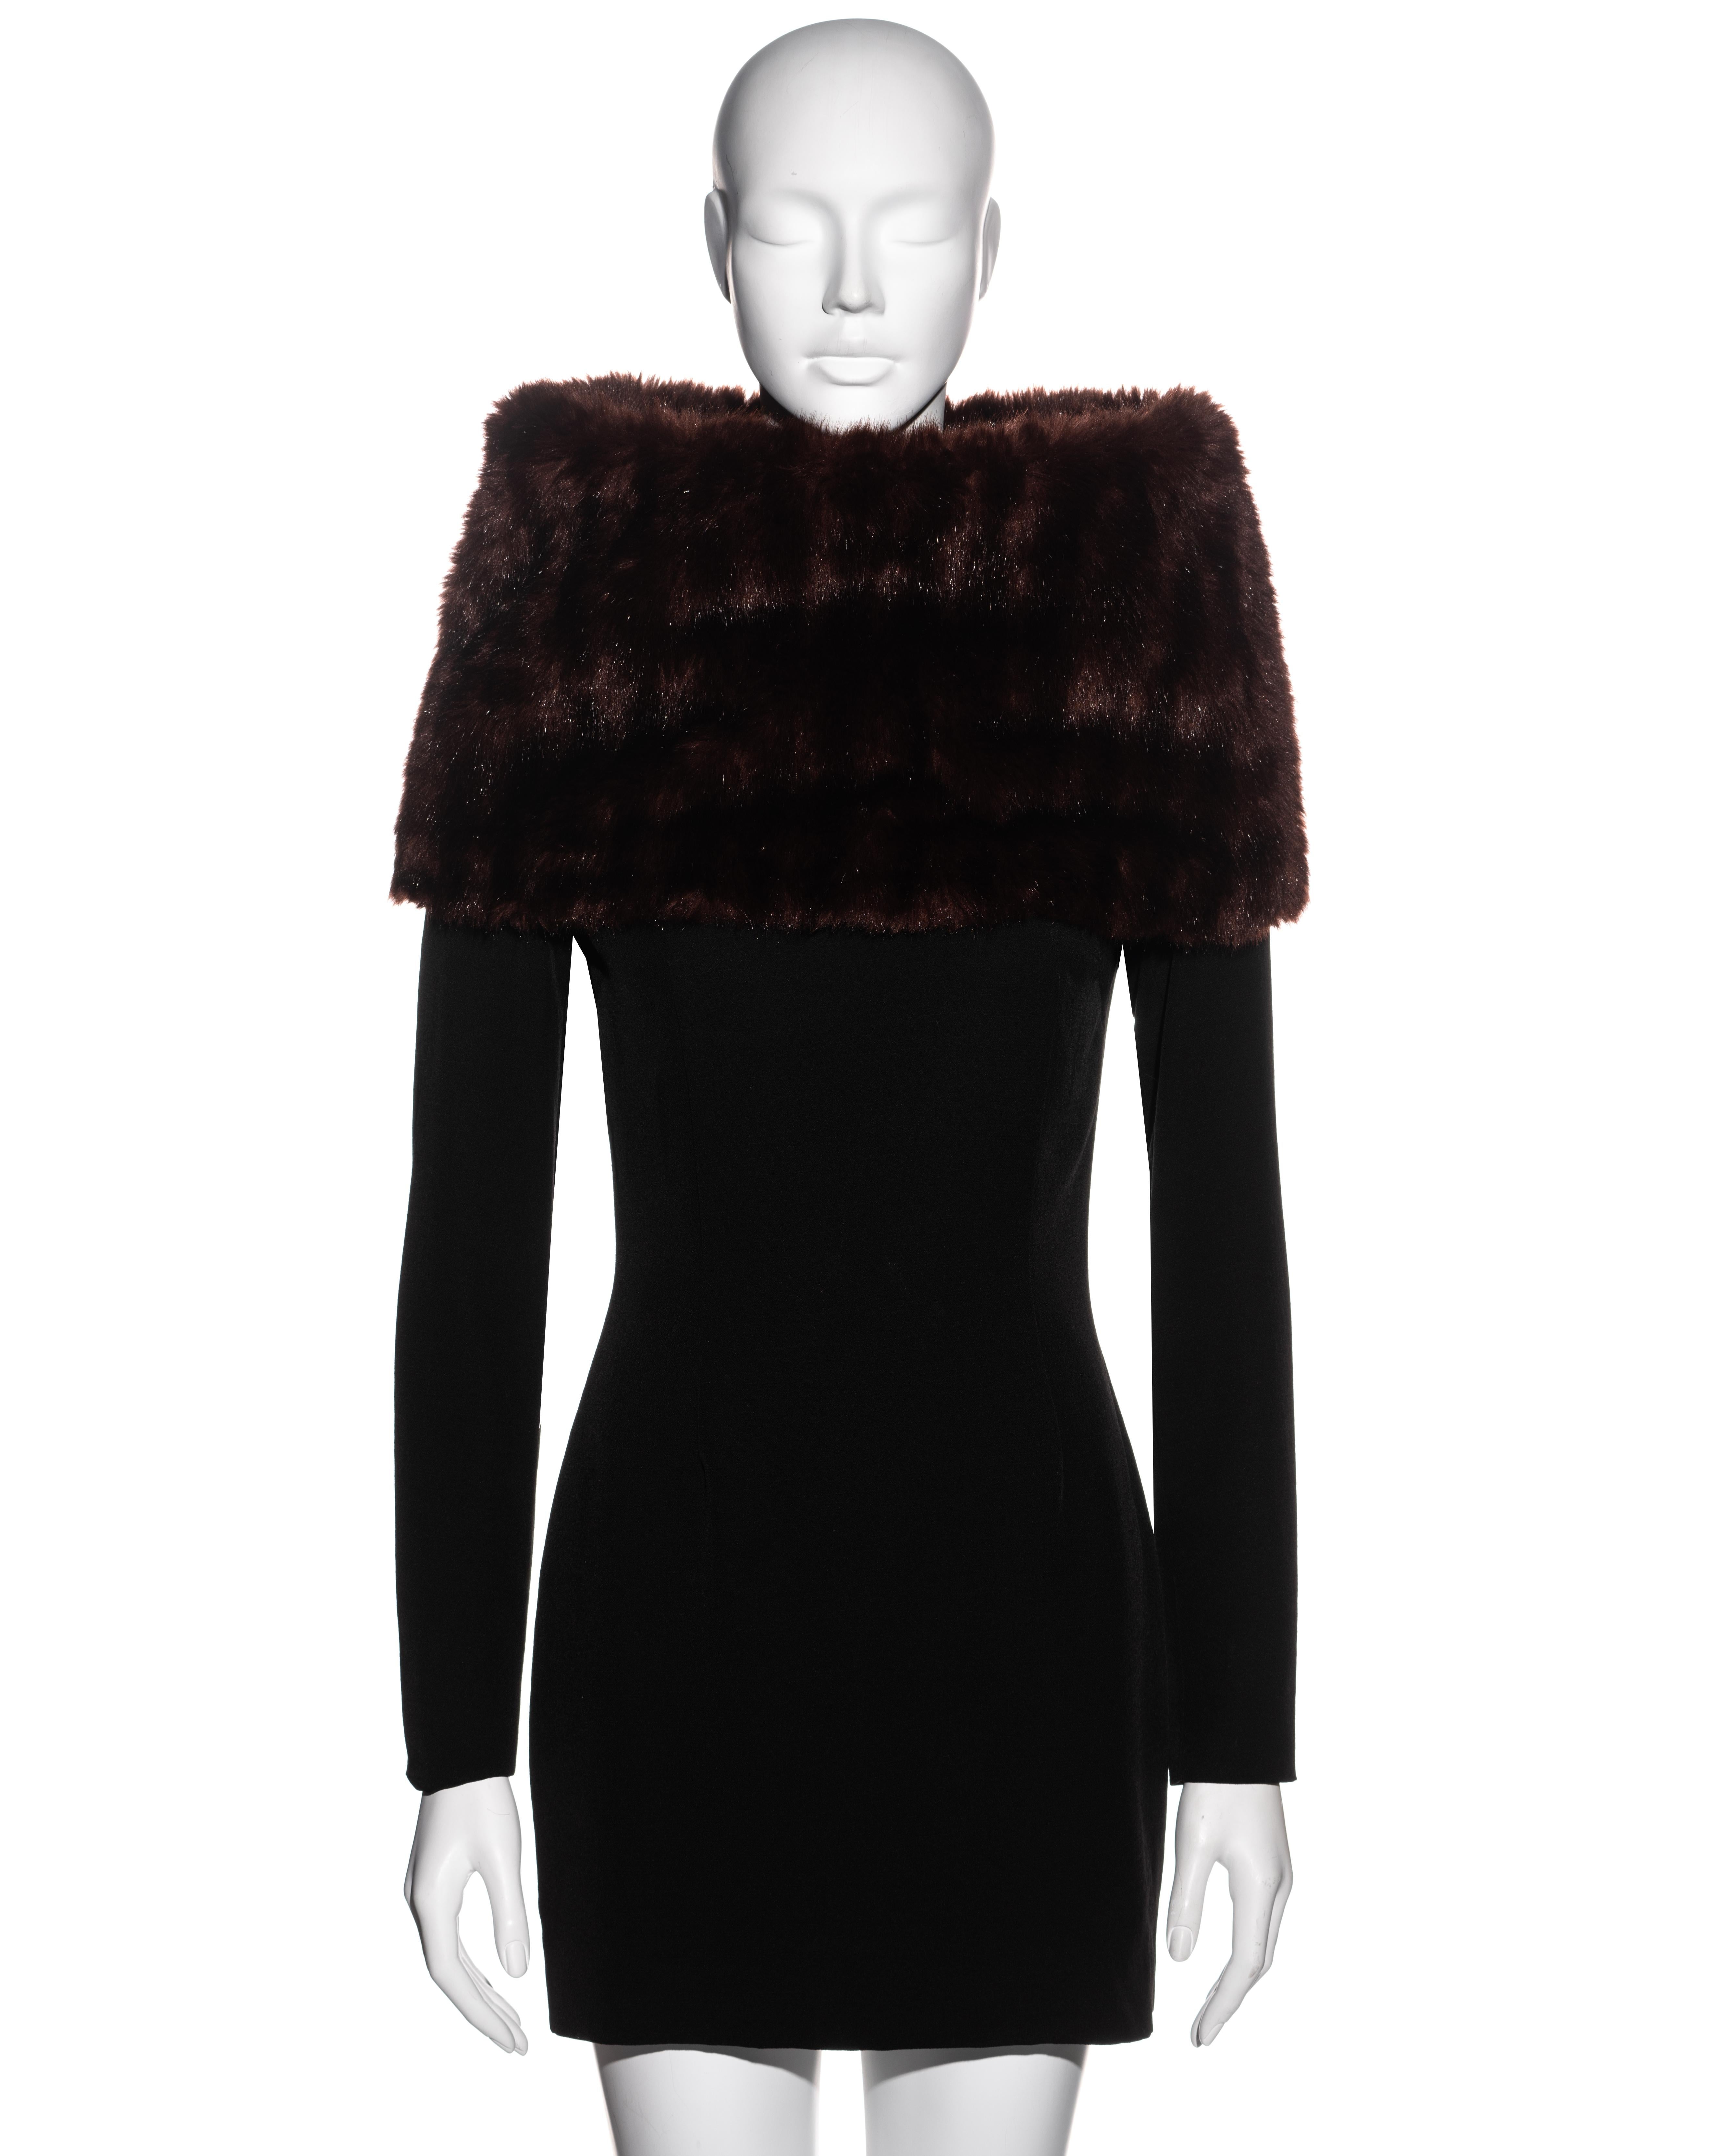 ▪ Dolce & Gabbana black wool mini dress
▪ Burgundy faux fur funnel neck which folds over the shoulders 
▪ Lined 
▪ Concealed zip fastening 
▪ IT 40 - FR 36 - UK 8 - US 4
▪ Fall-Winter 1995